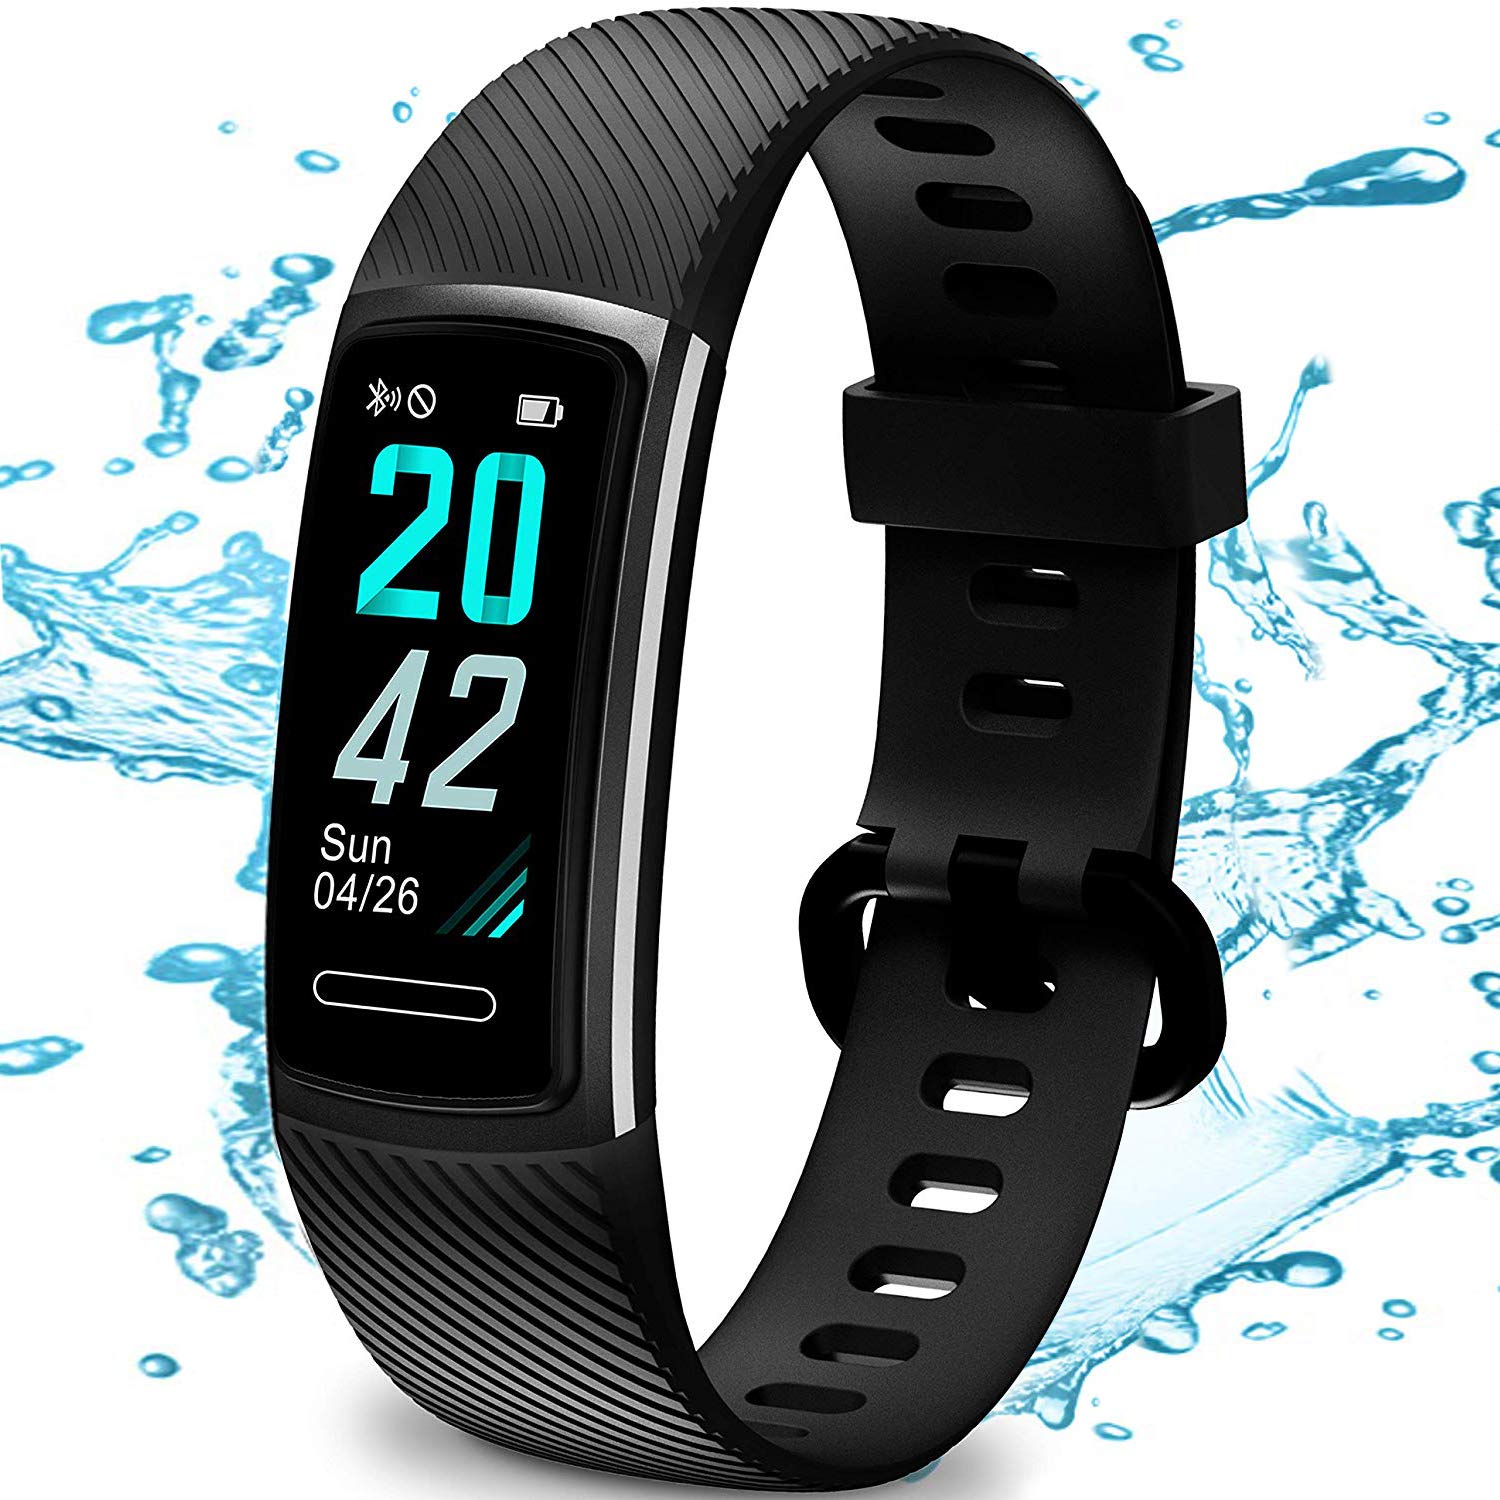 TEMINICE High-End Fitness Trackers HR, Activity Trackers Health Exercise Watch with Heart Rate and Sleep Monitor, Smart Band Calorie Counter, Step Counter, Pedometer Walking for Men & Women